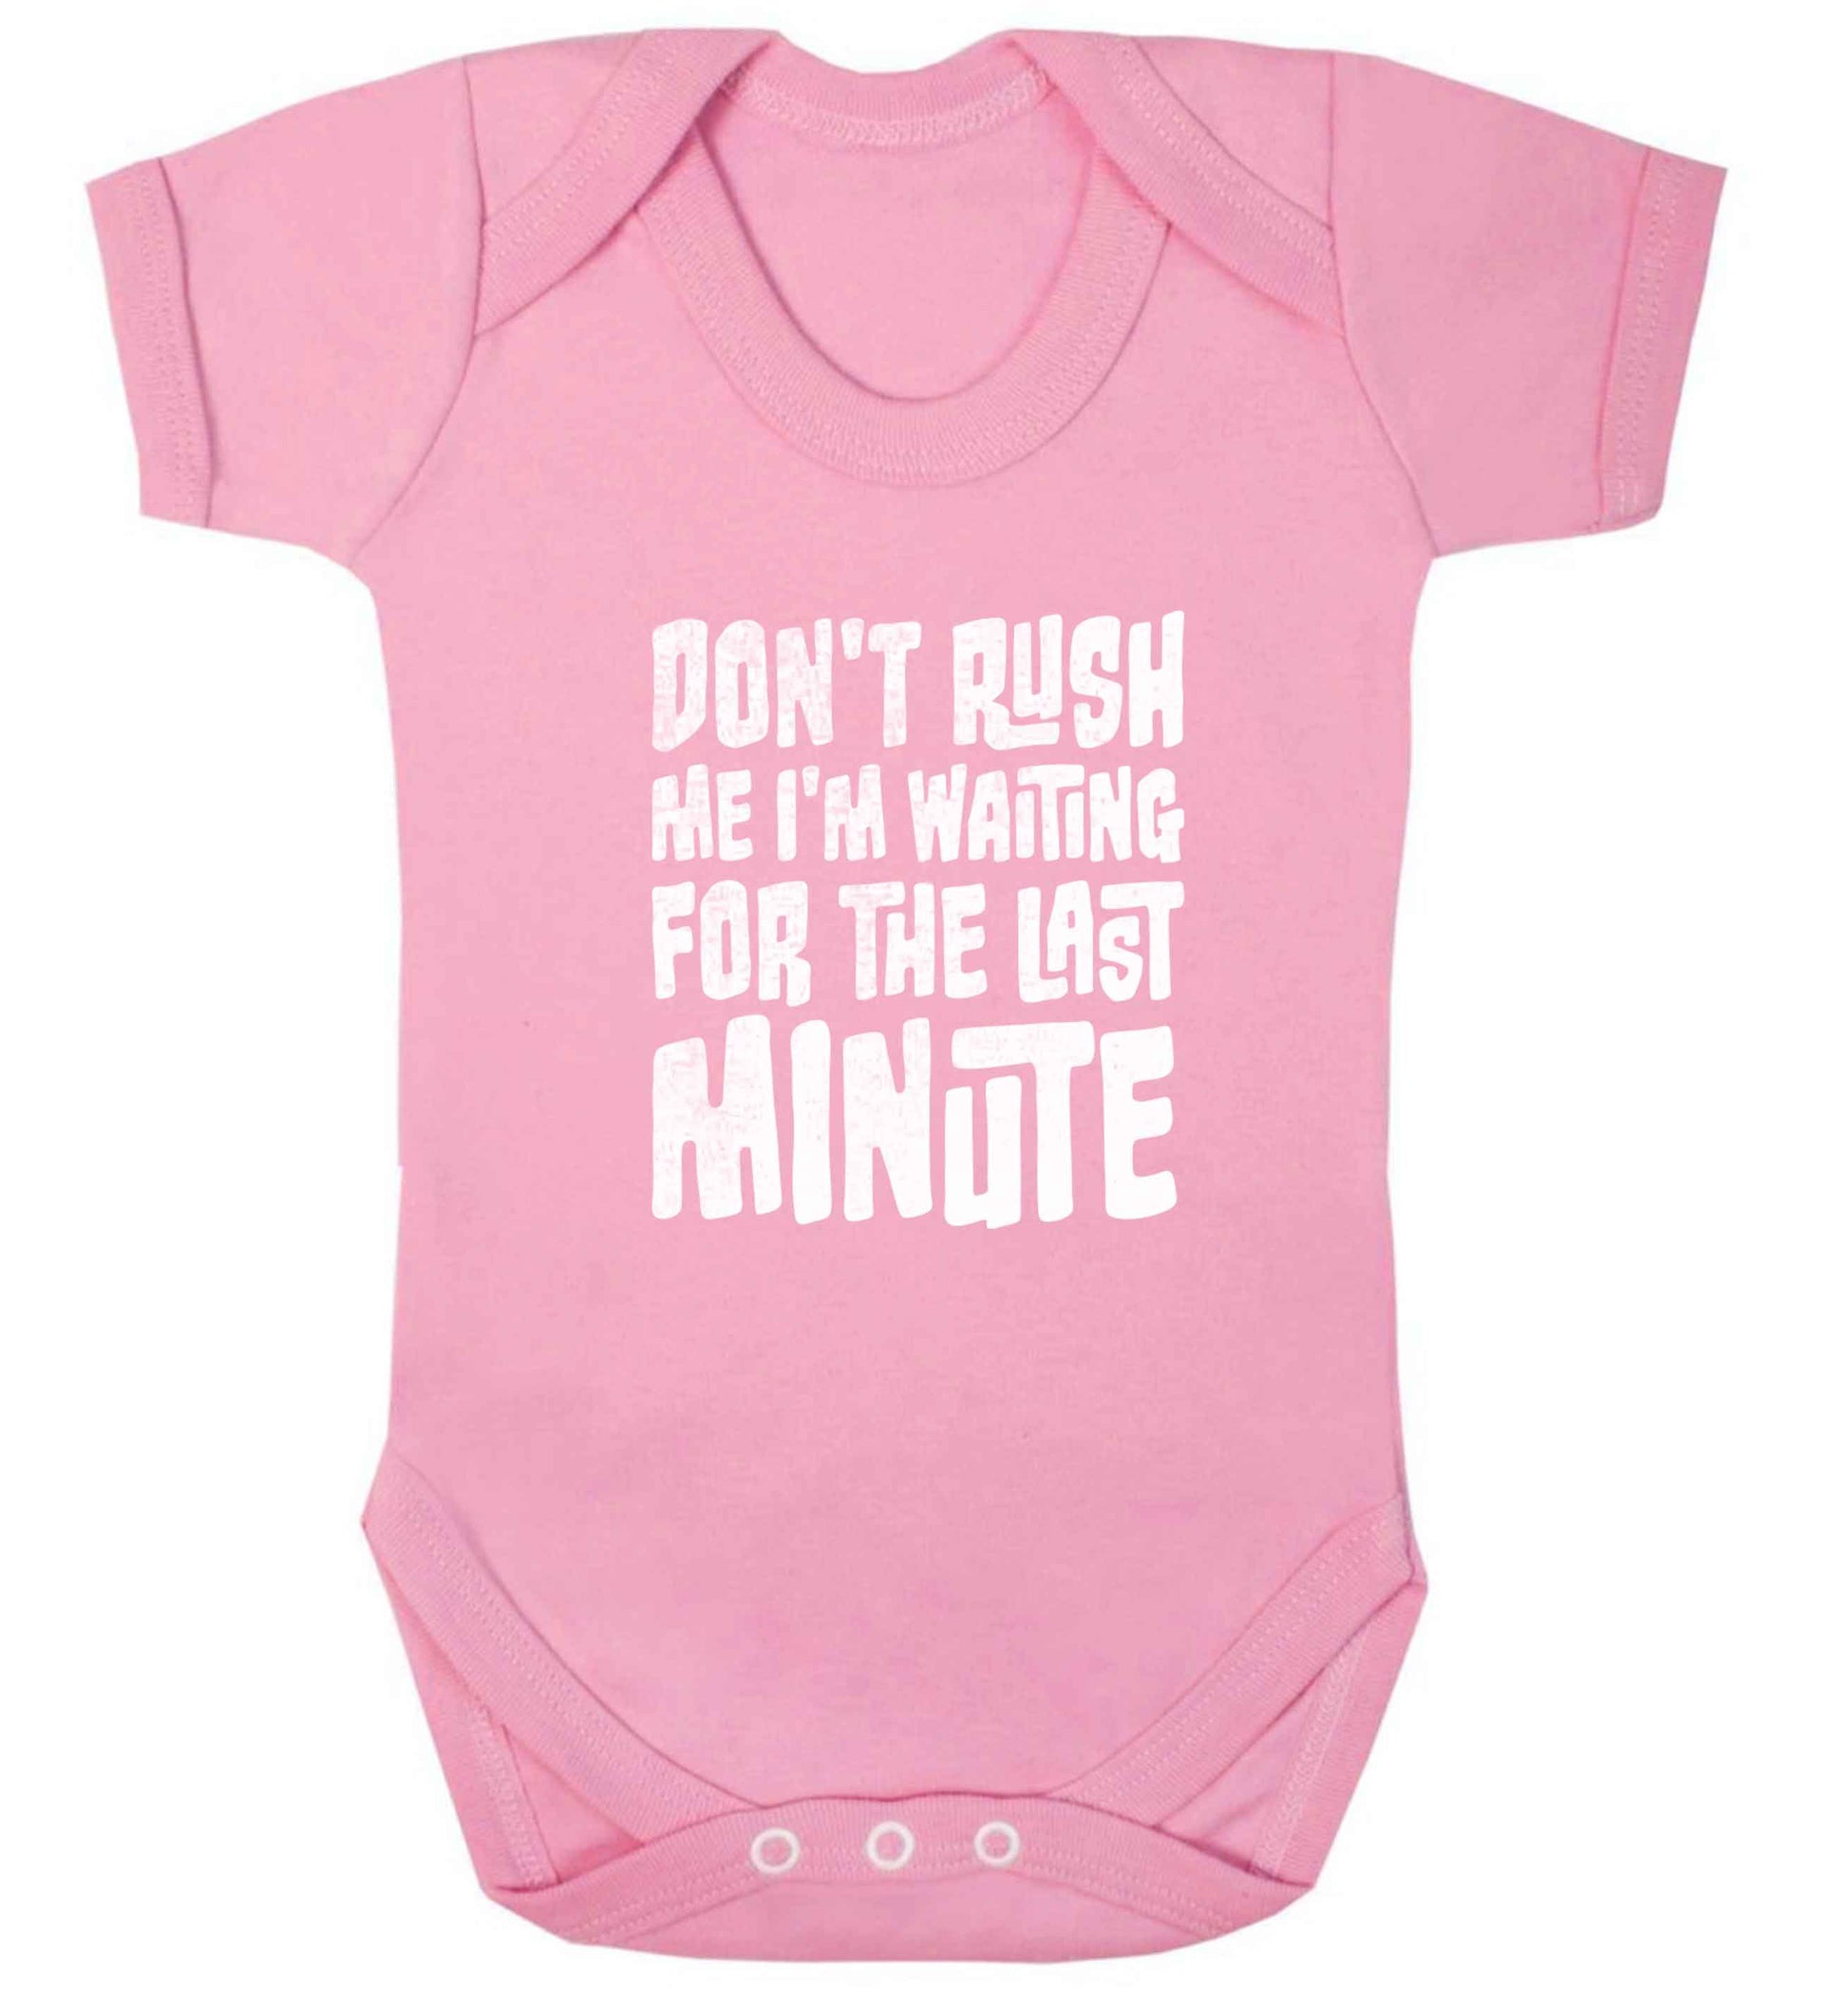 Don't rush me I'm waiting for the last minute baby vest pale pink 18-24 months